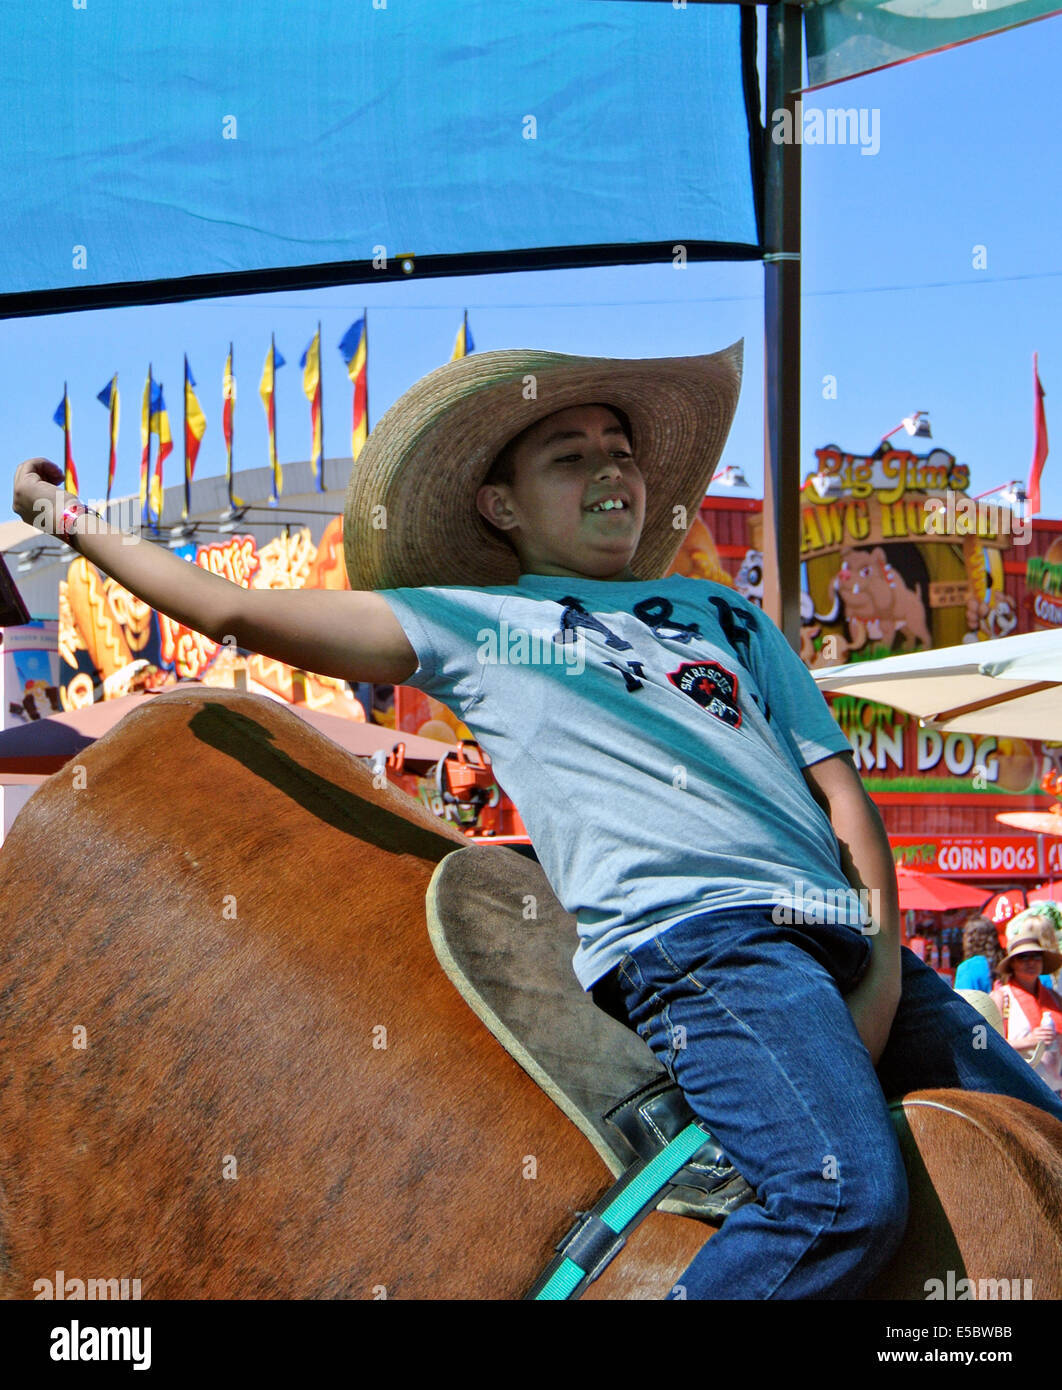 Santa Rosa, California, USA. 26th July, 2014. July 26th Santa Rosa California. Mexican American  boy wearing cowboy hat waves arm in the air in victory after riding mechanical bull ride at Sonoma County fair in Santa Rosa California USA Credit:  Bob Kreisel/Alamy Live News Stock Photo